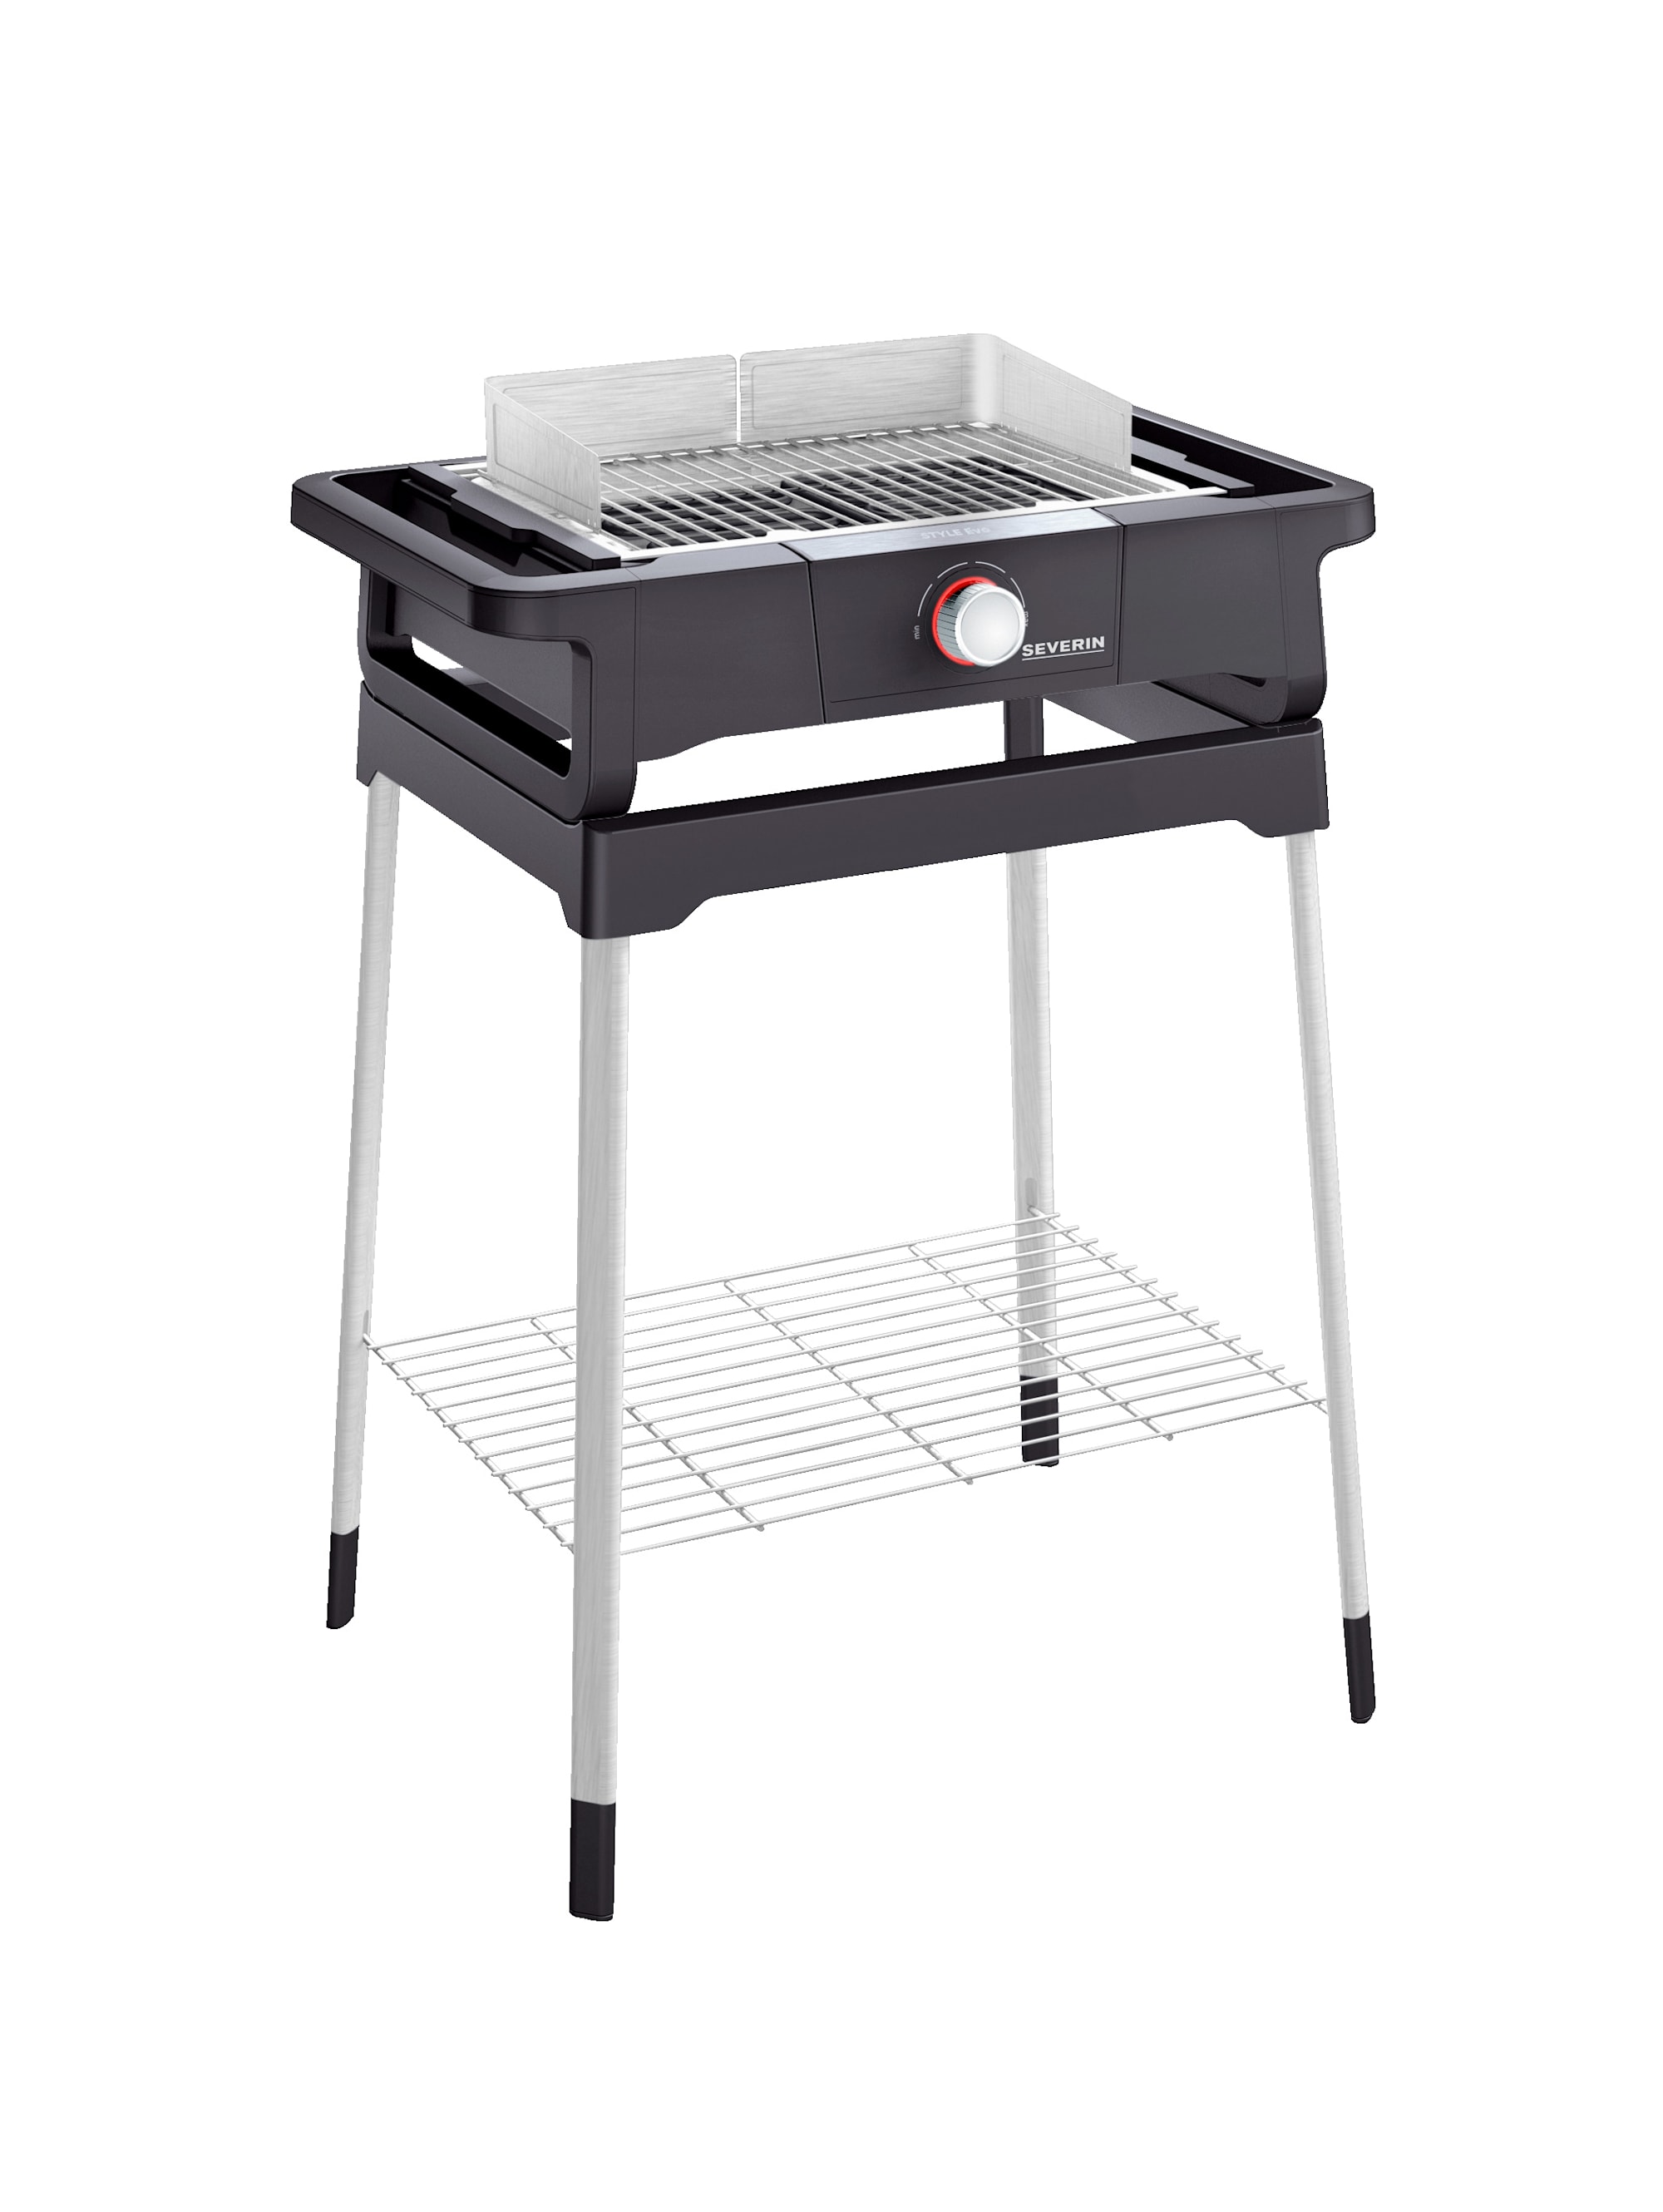 SEVERIN Standgrill STYLE EVO S PG 8124 ca.